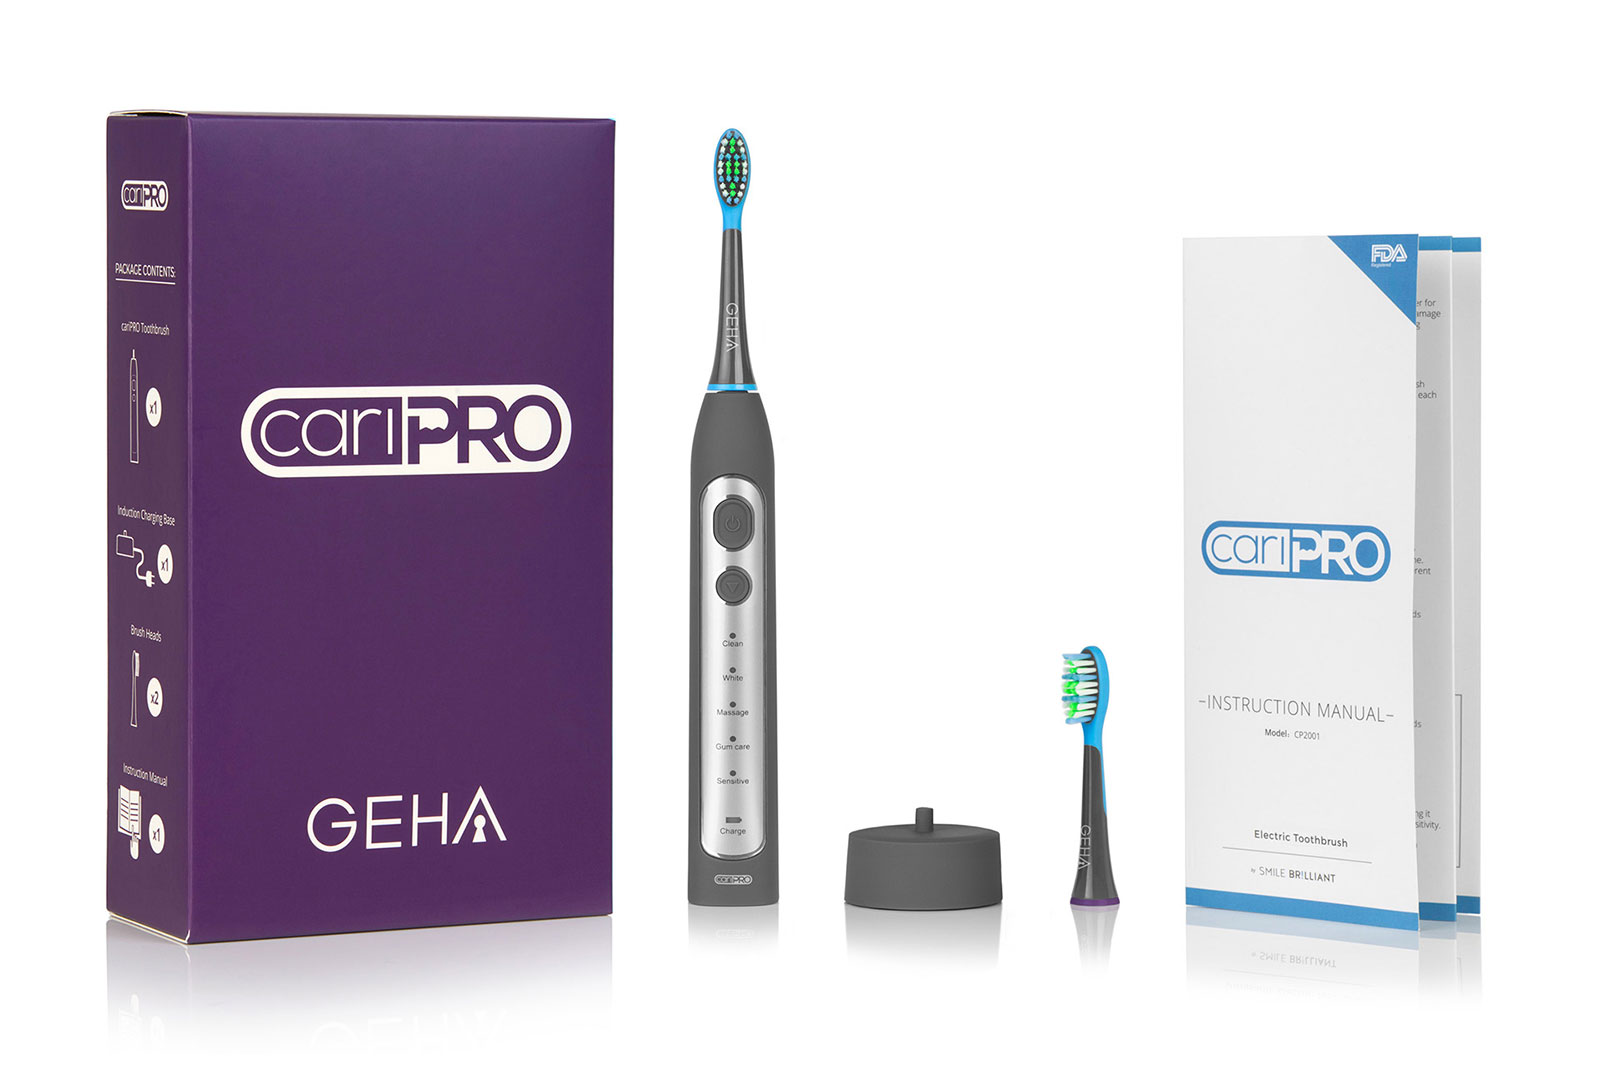 geha premium electric toothbrush by caripro